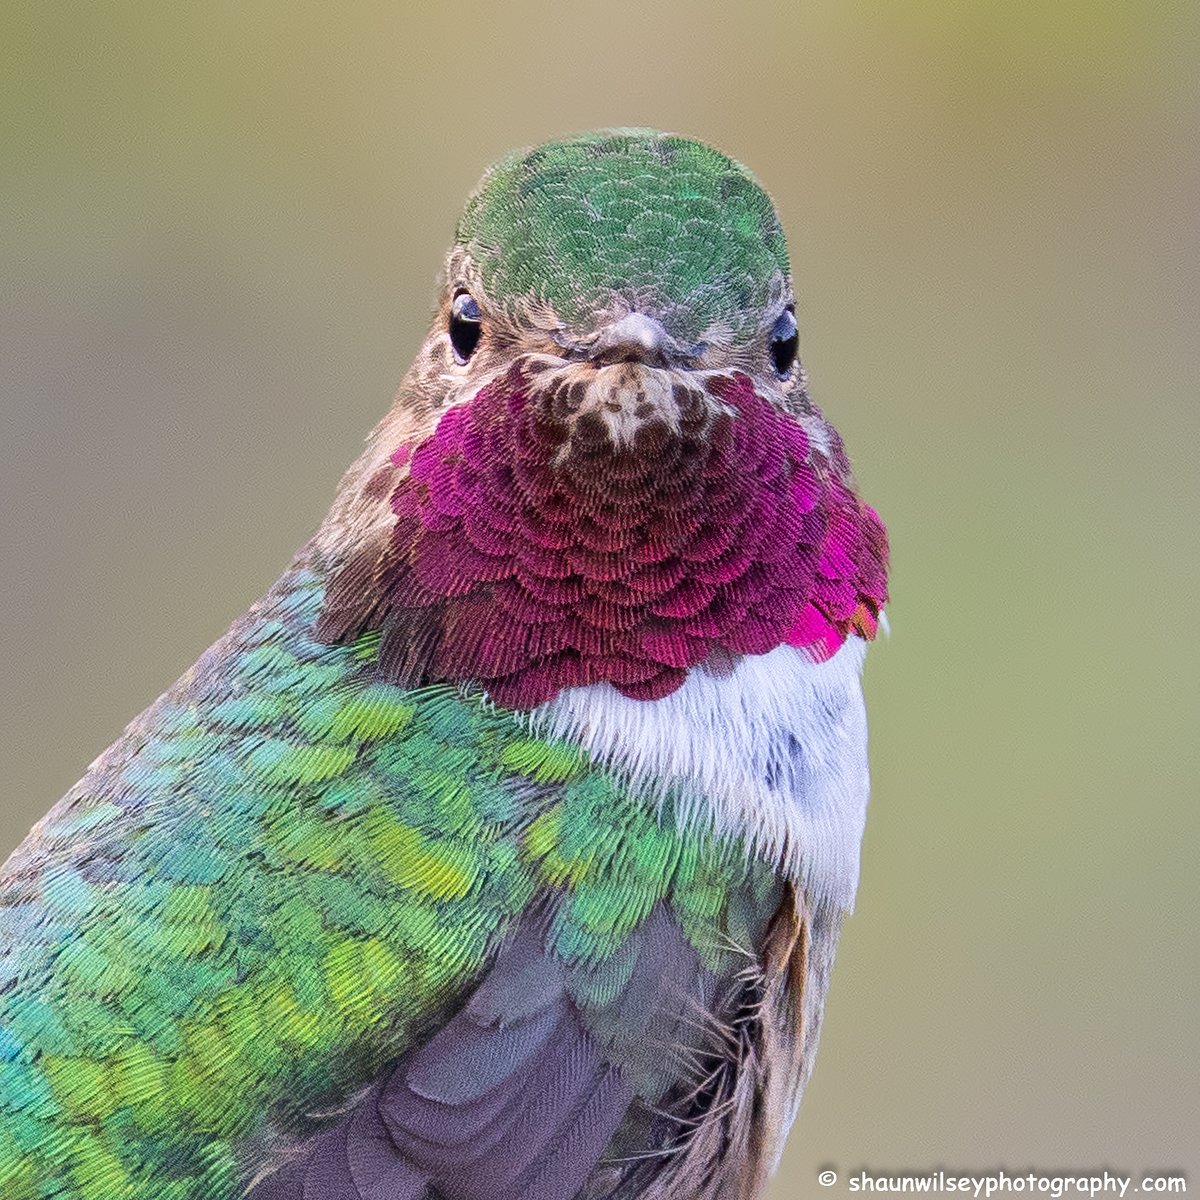 Staring contest with a Broad-Tailed Hummingbird. Colorado 8/23/2022. #colorado #coloradophotography #photography #wildlife #wildlifephotography #bird #birds #hummingbird #hummingbirds #broadtailedhummingbird #broadtailedhummingbirds #staringcontest